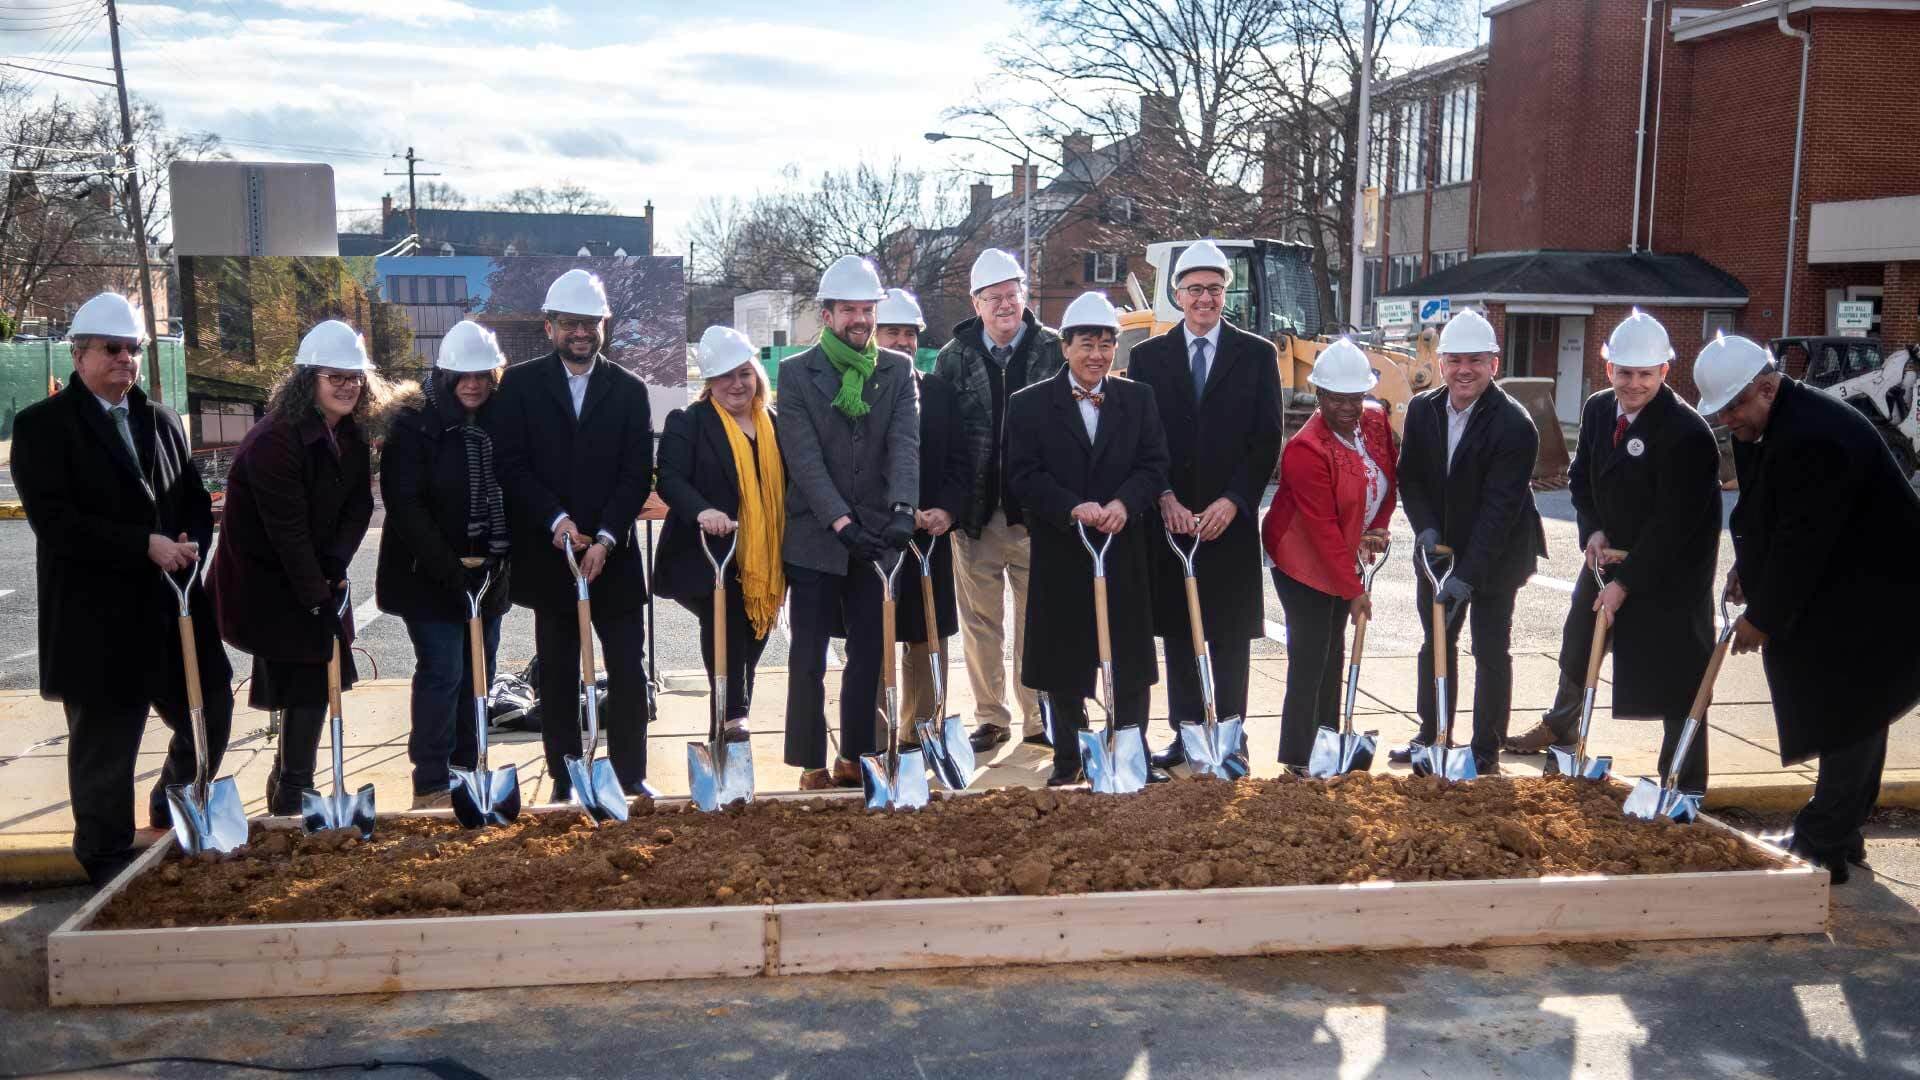 City of College Park and University of Maryland leaders broke ground yesterday on the new City Hall project.